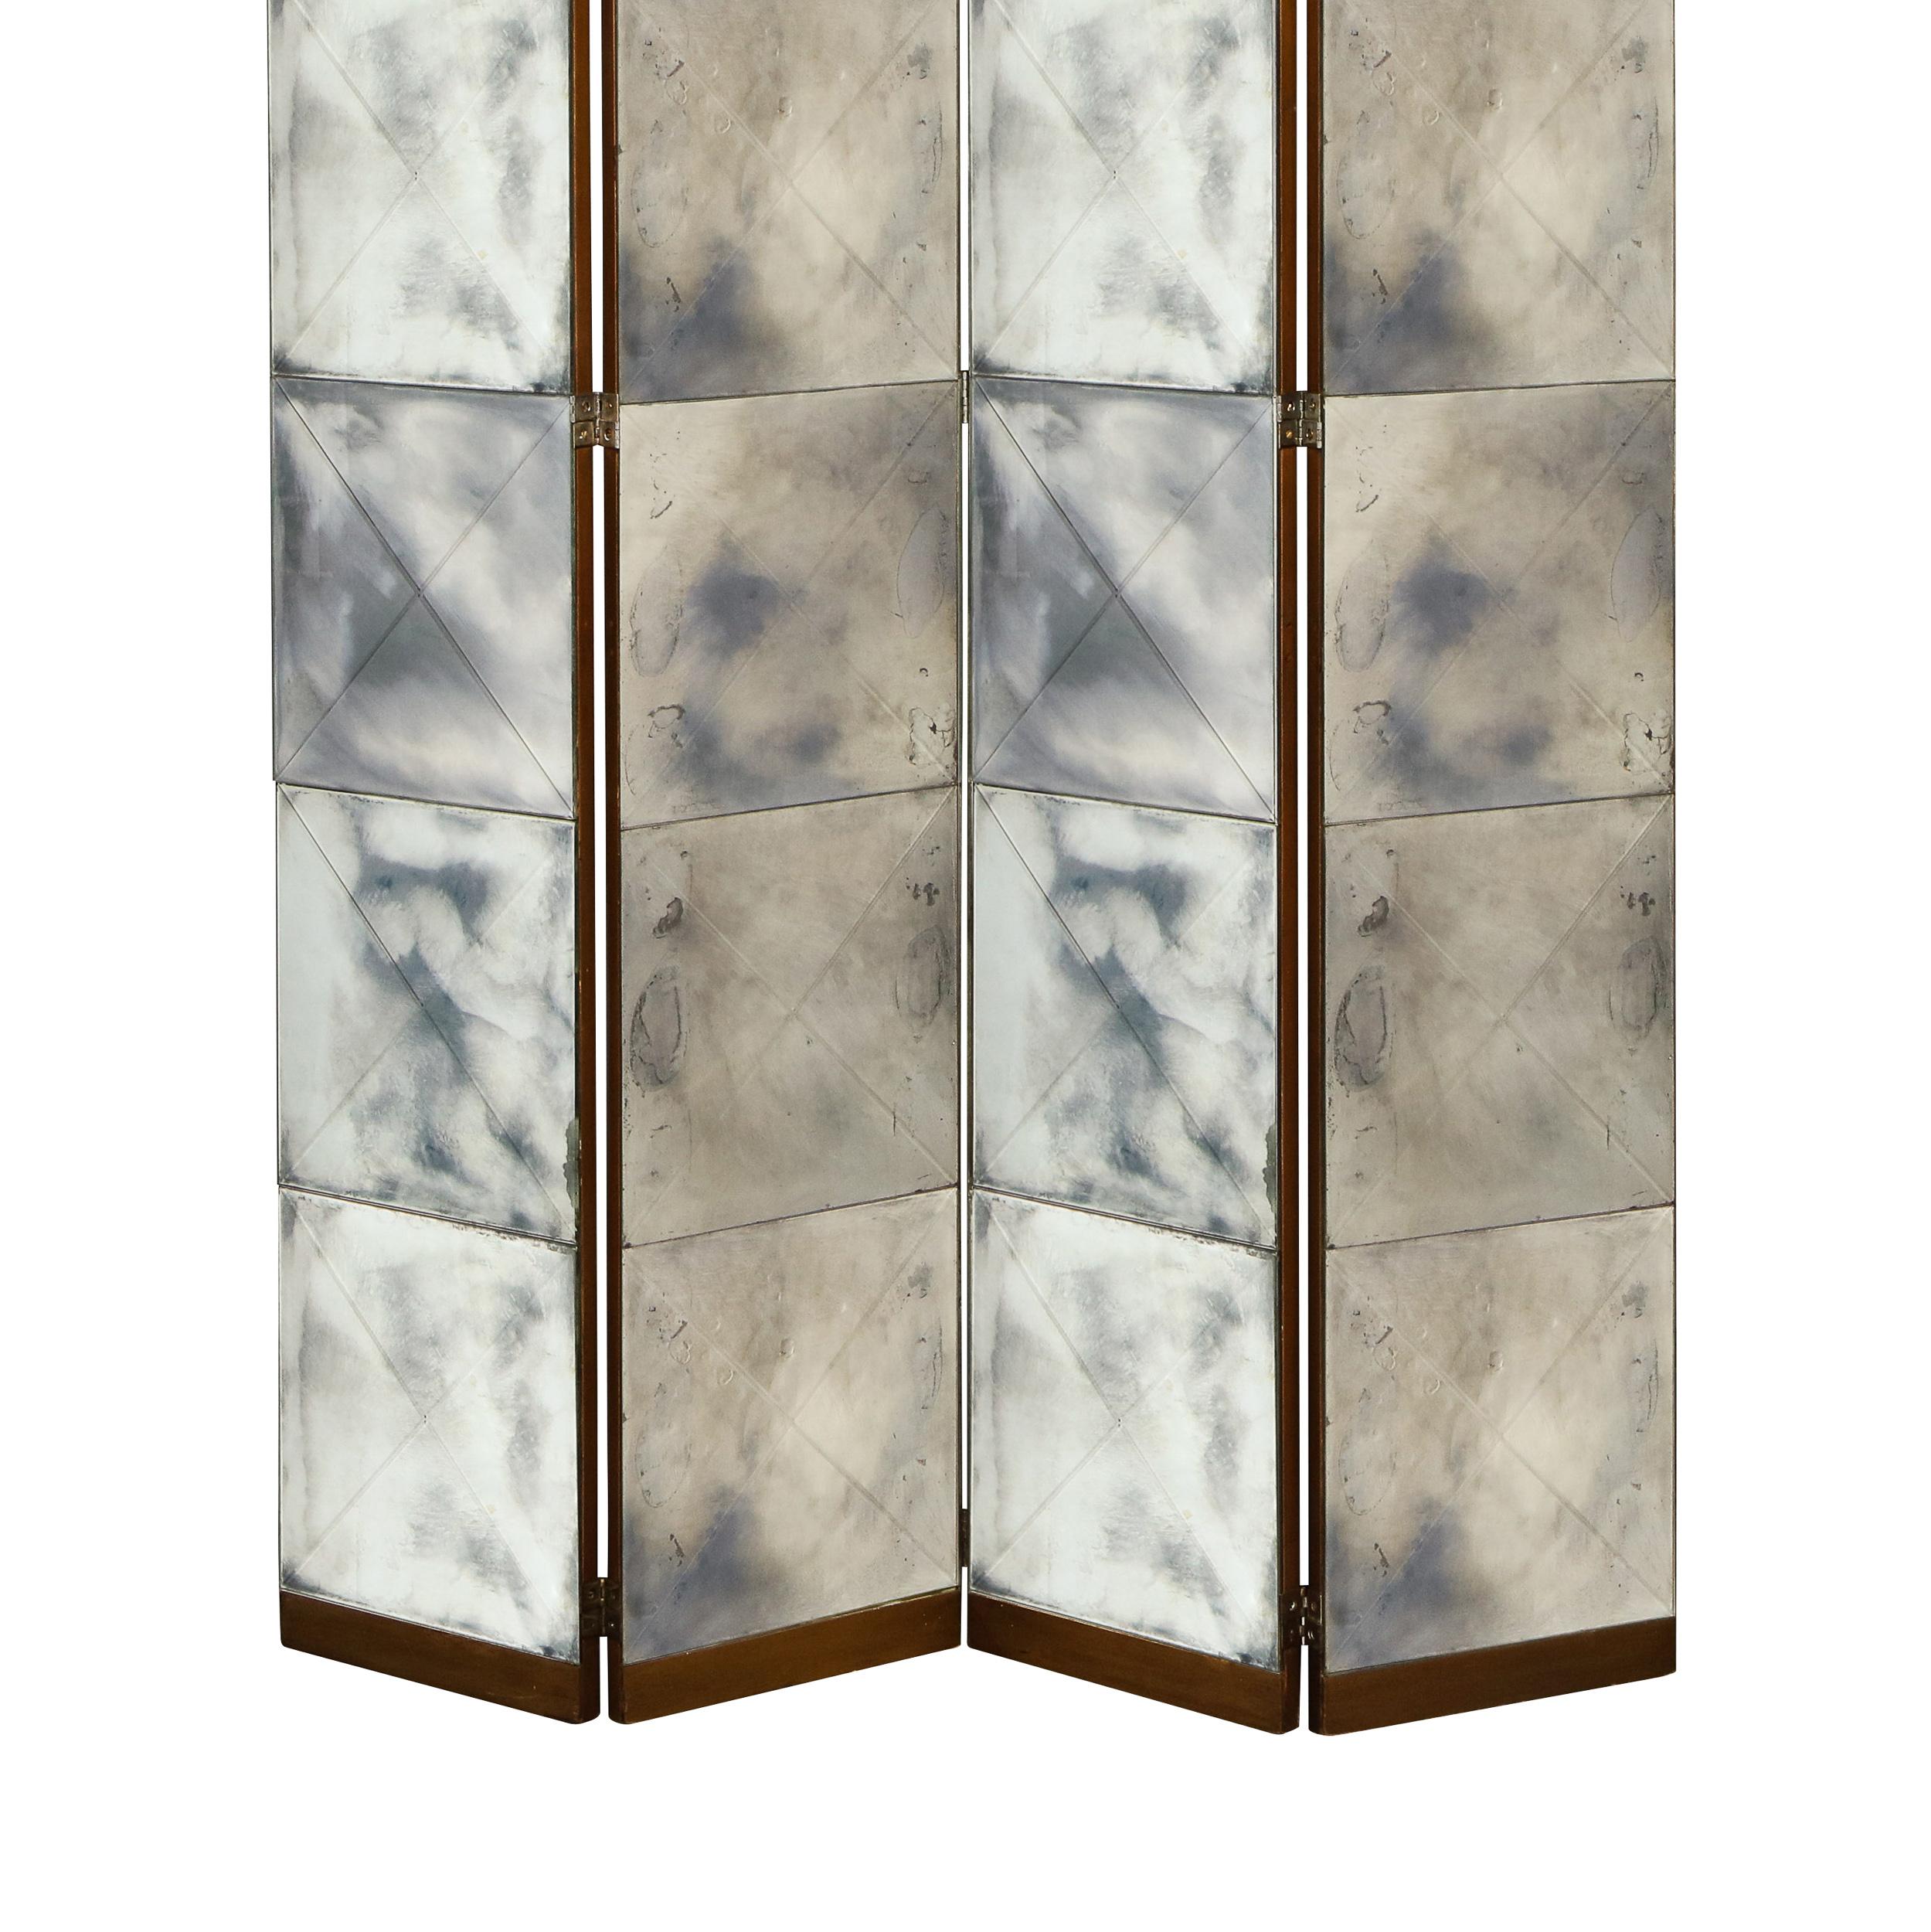 Mid-20th Century French Mid Century Modern 4 Panel Walnut & Antiqued Tessellated Mirrored Screen